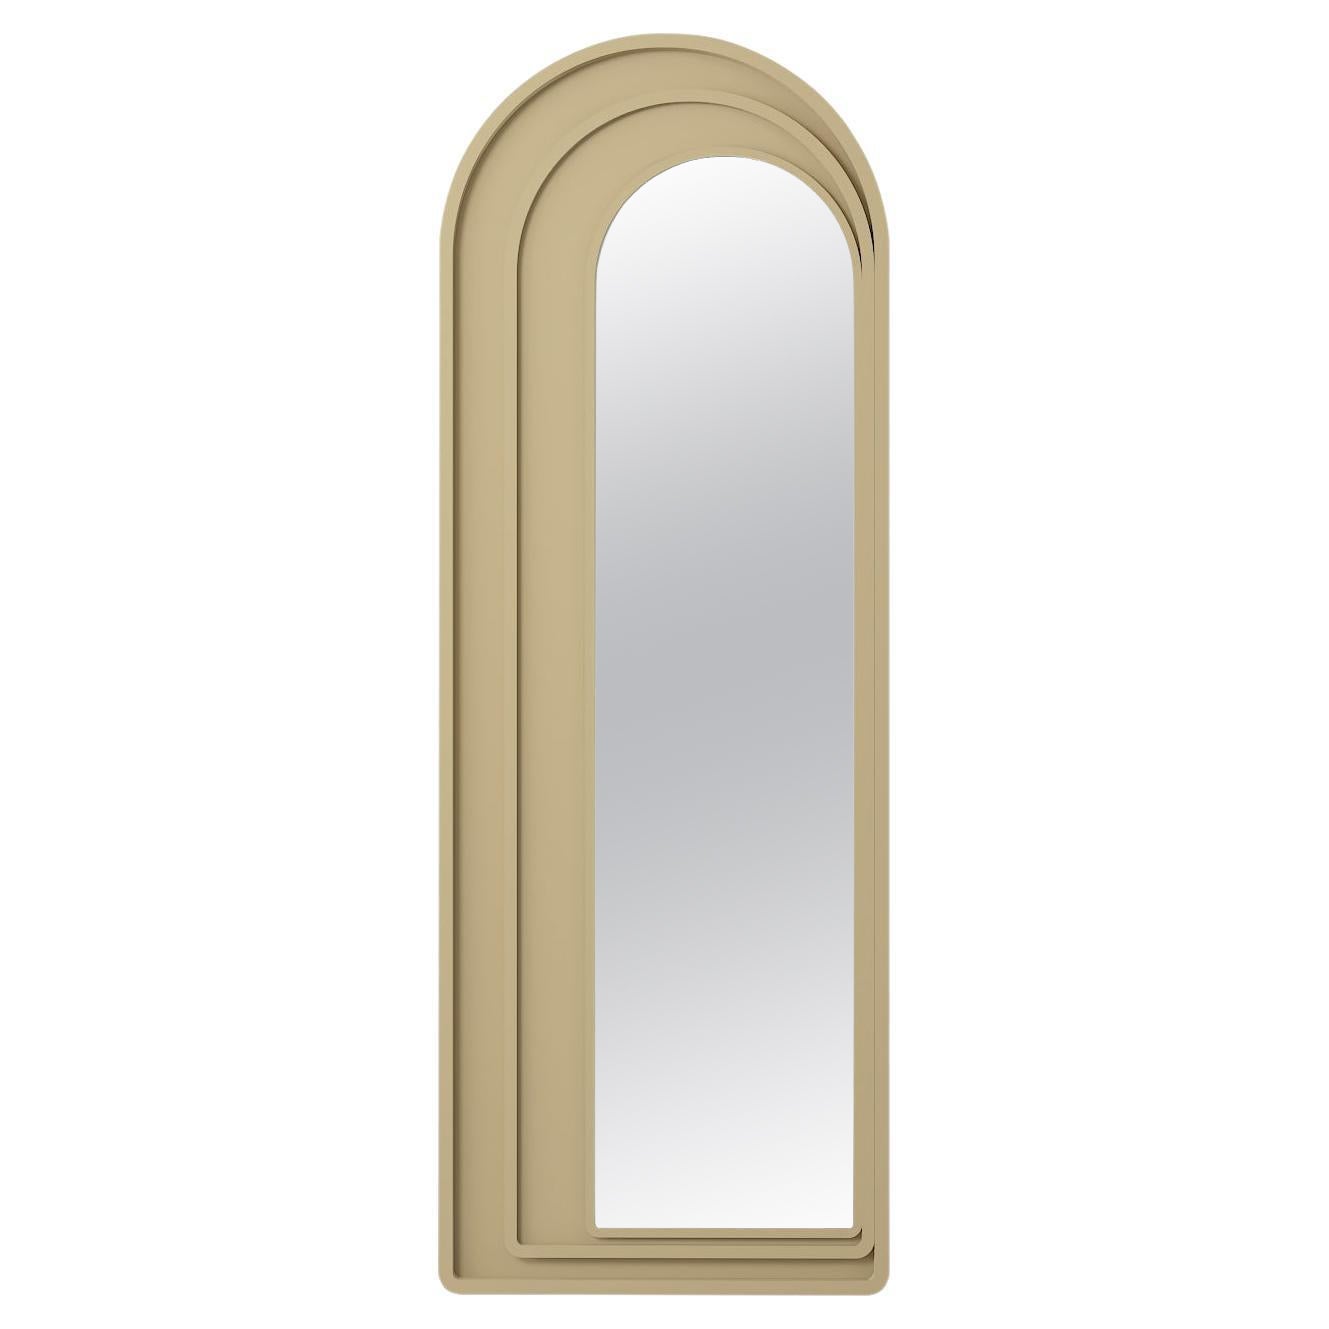 Beige Modernist Lacquered Mirror For Sale